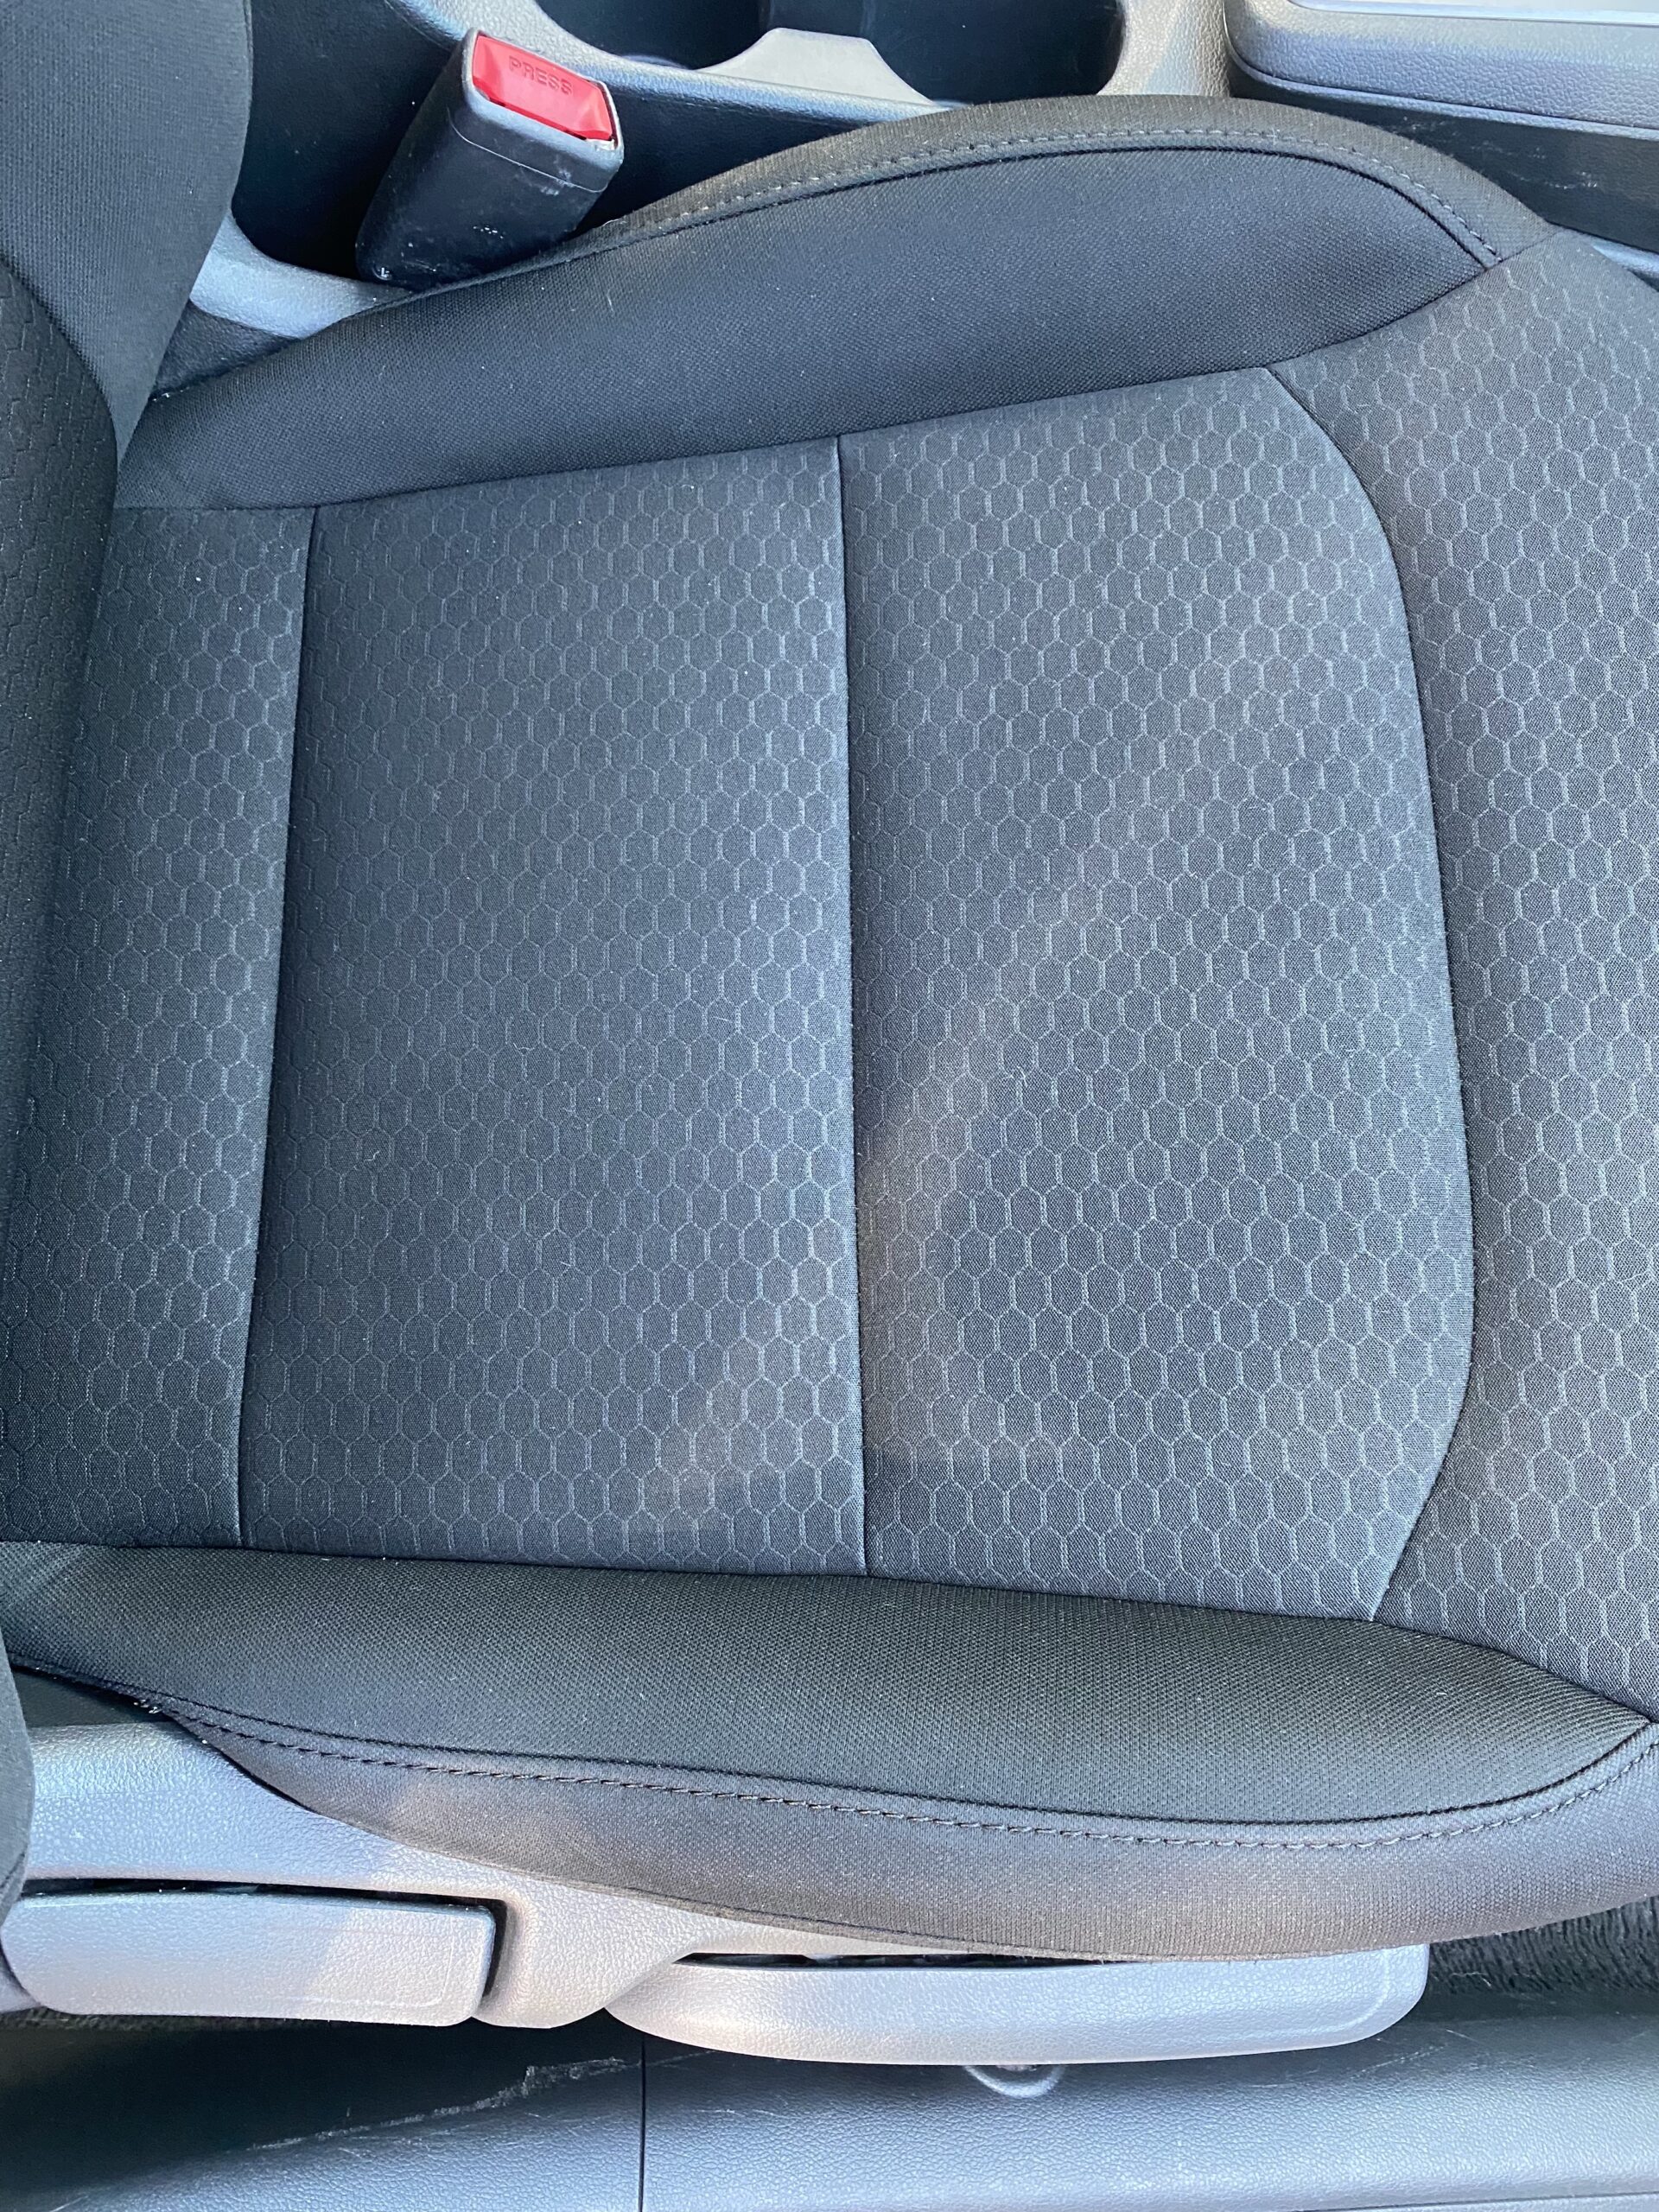 interior passenger seat stain after photo